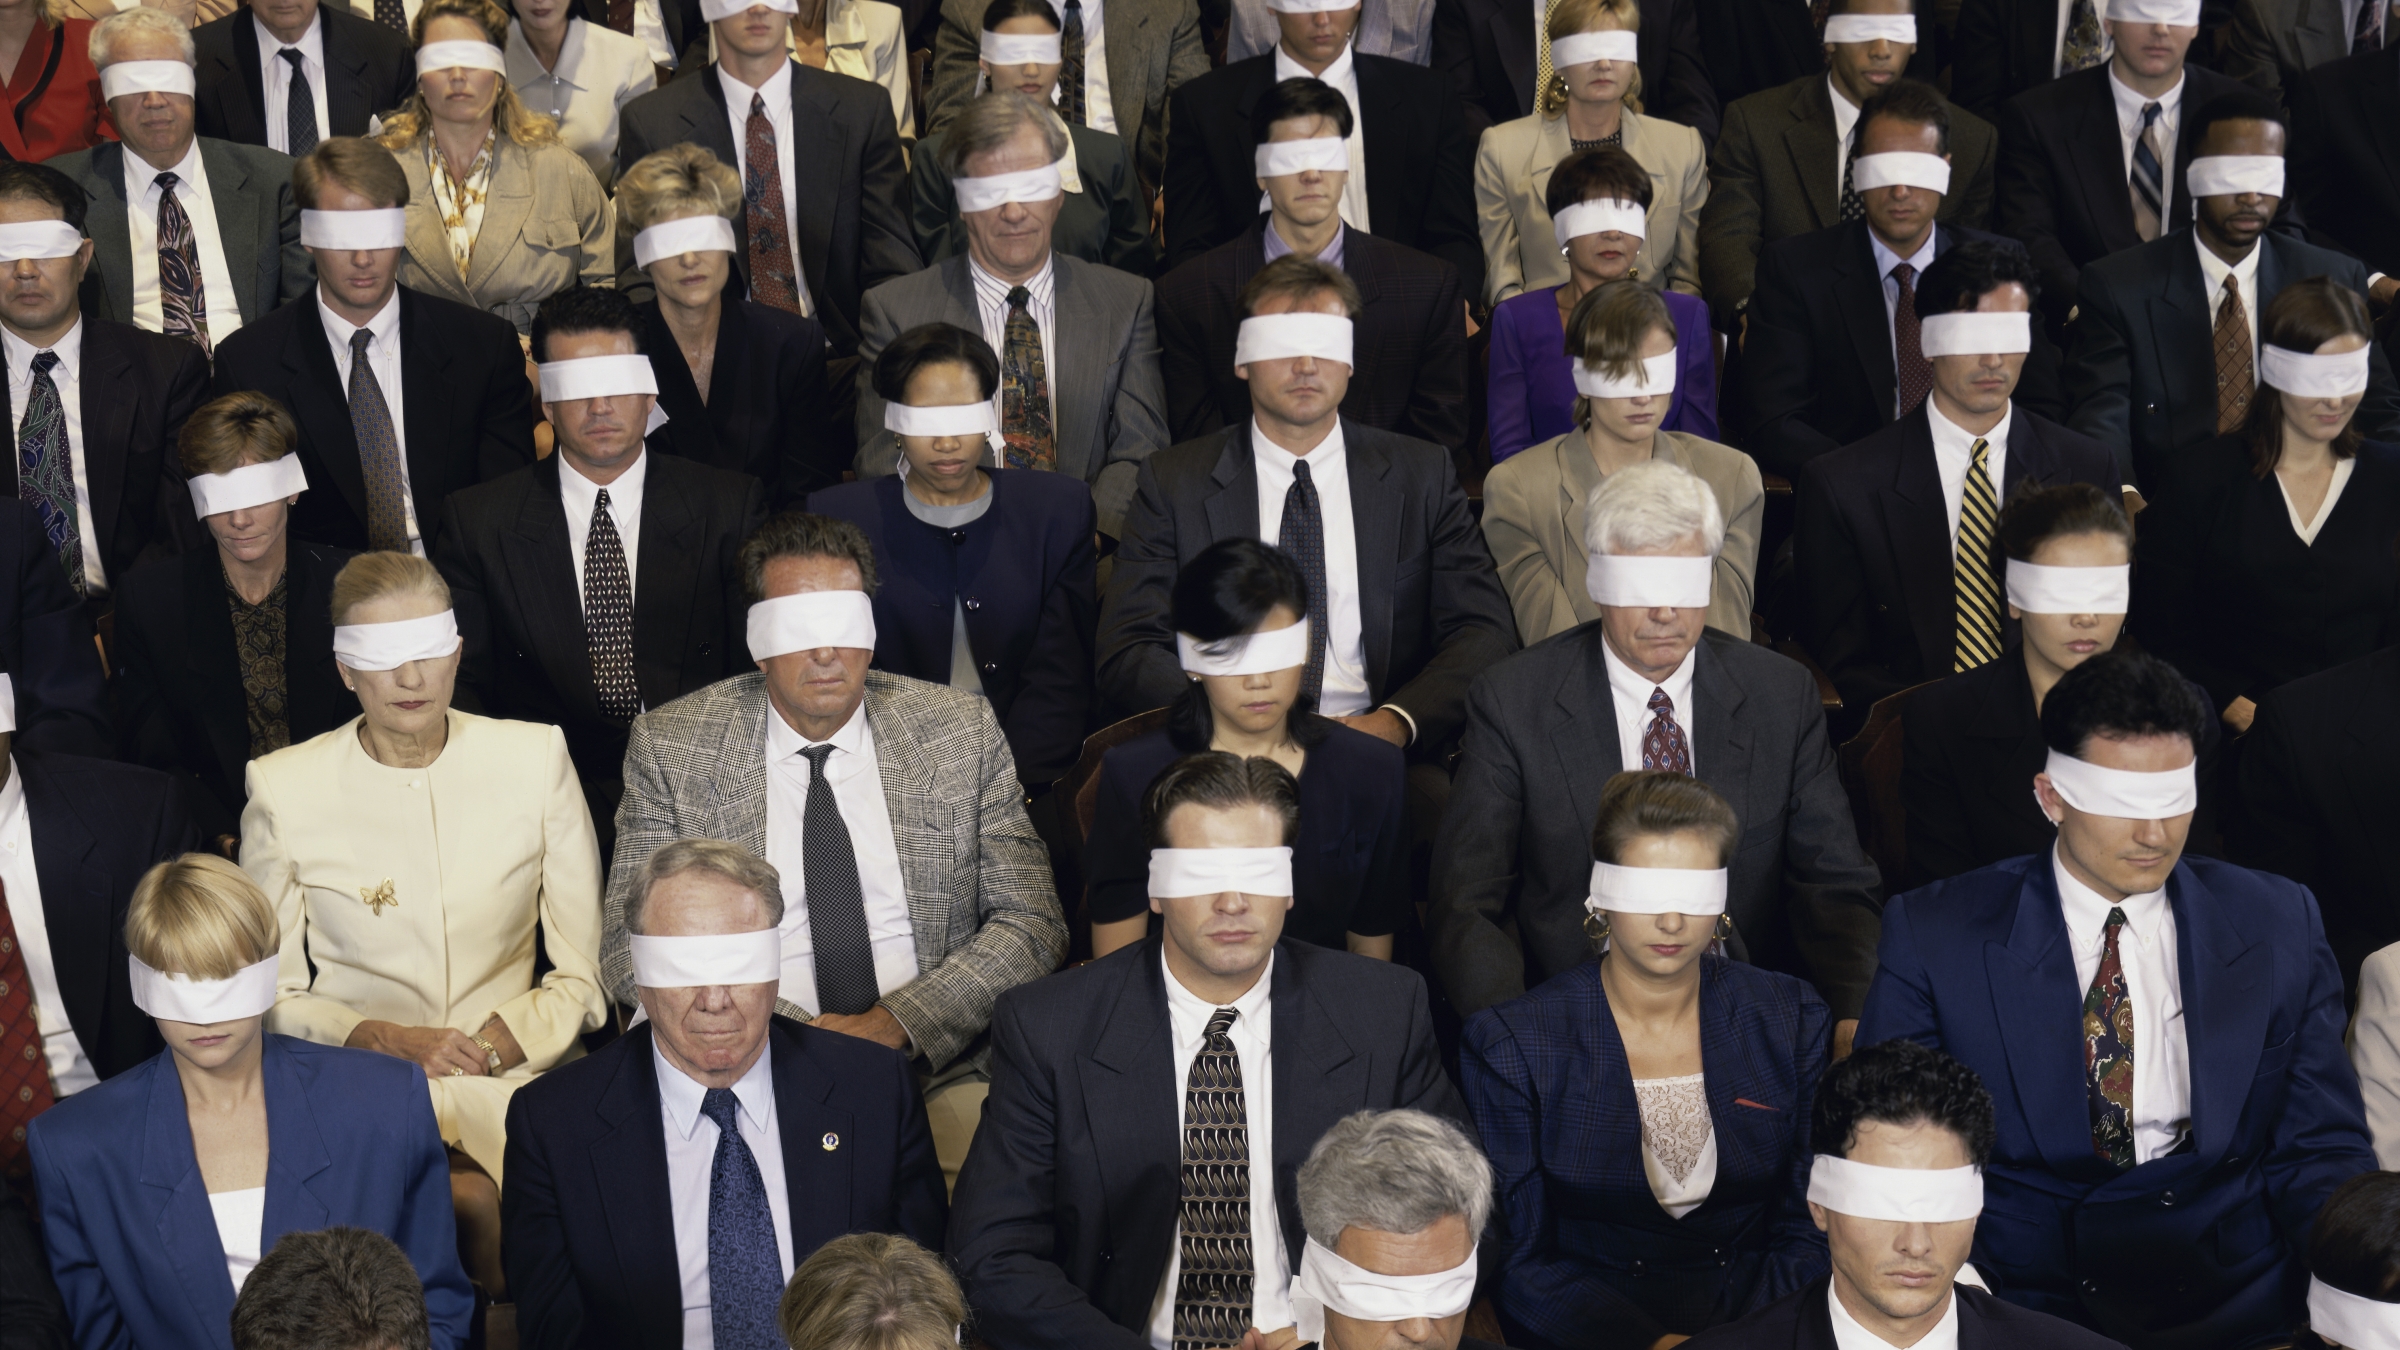 A crowd of blindfolded people